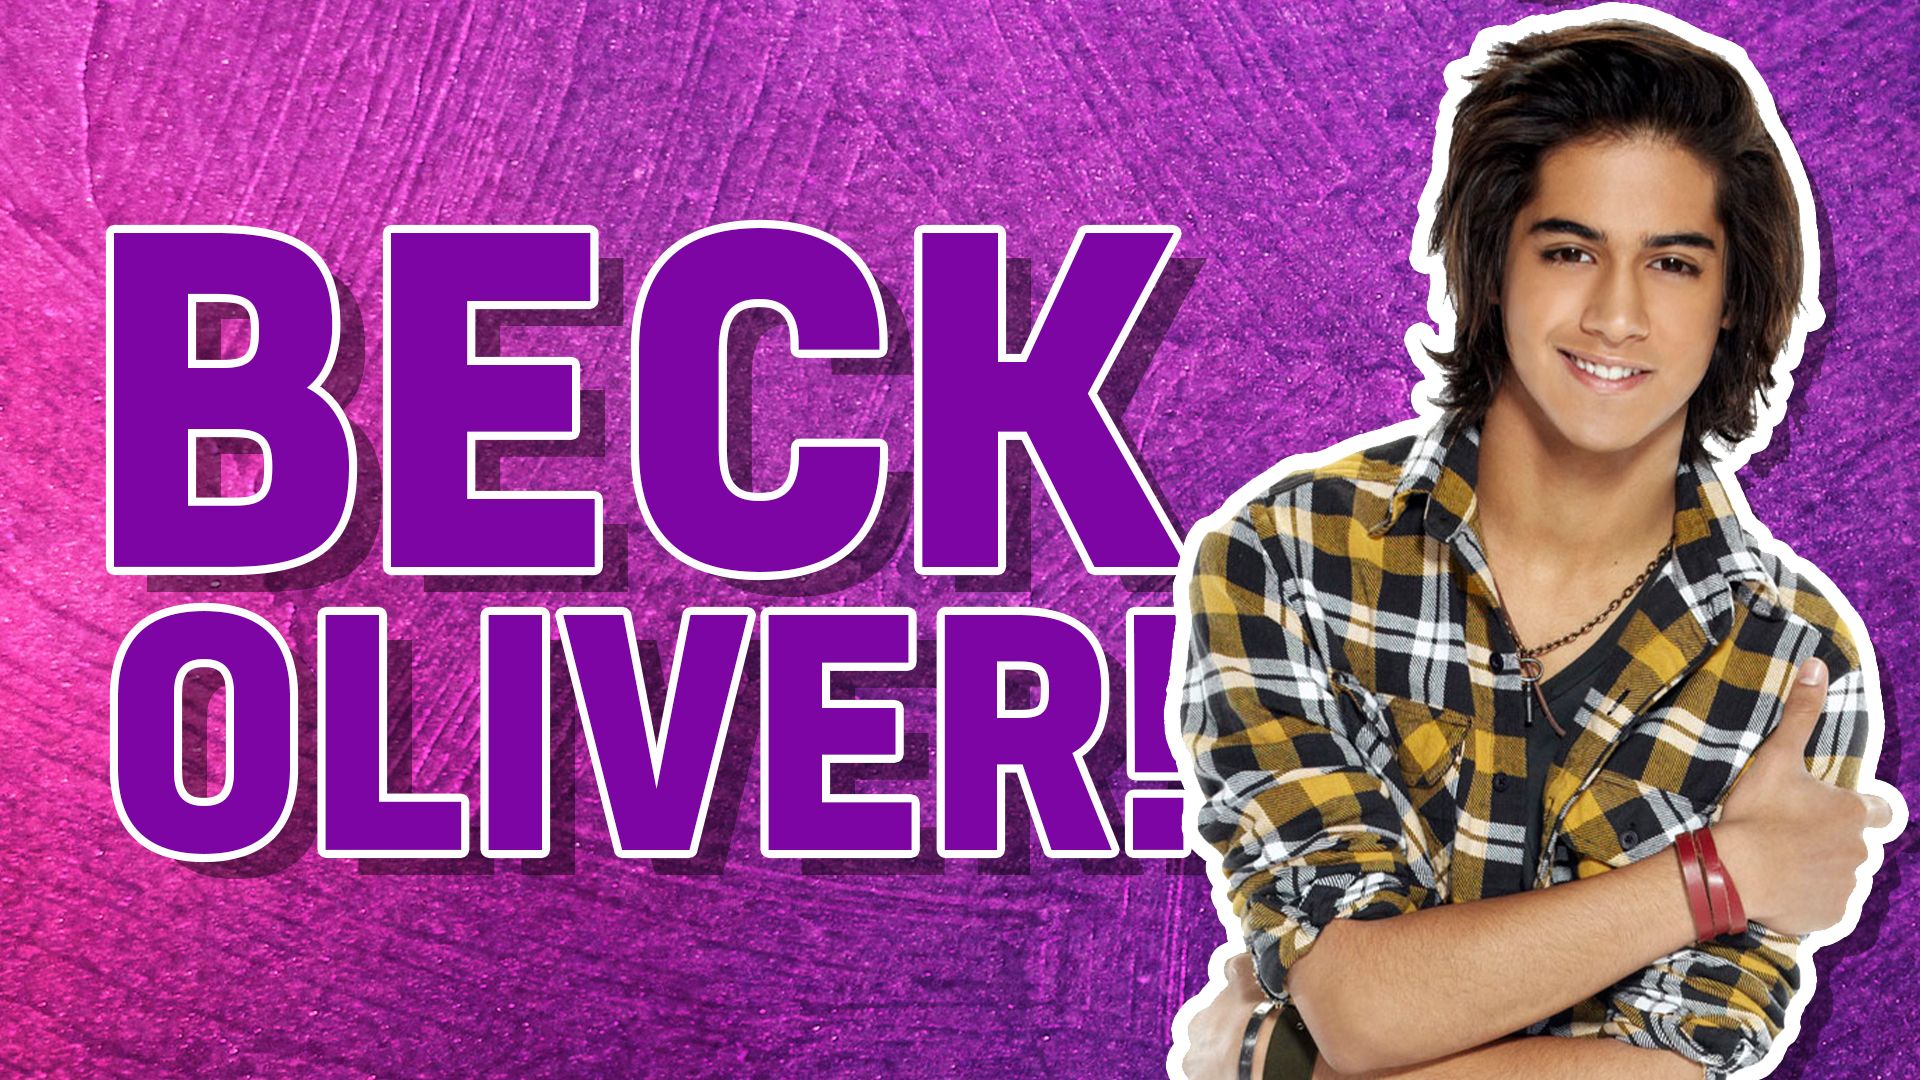 Beck Oliver in Victorious